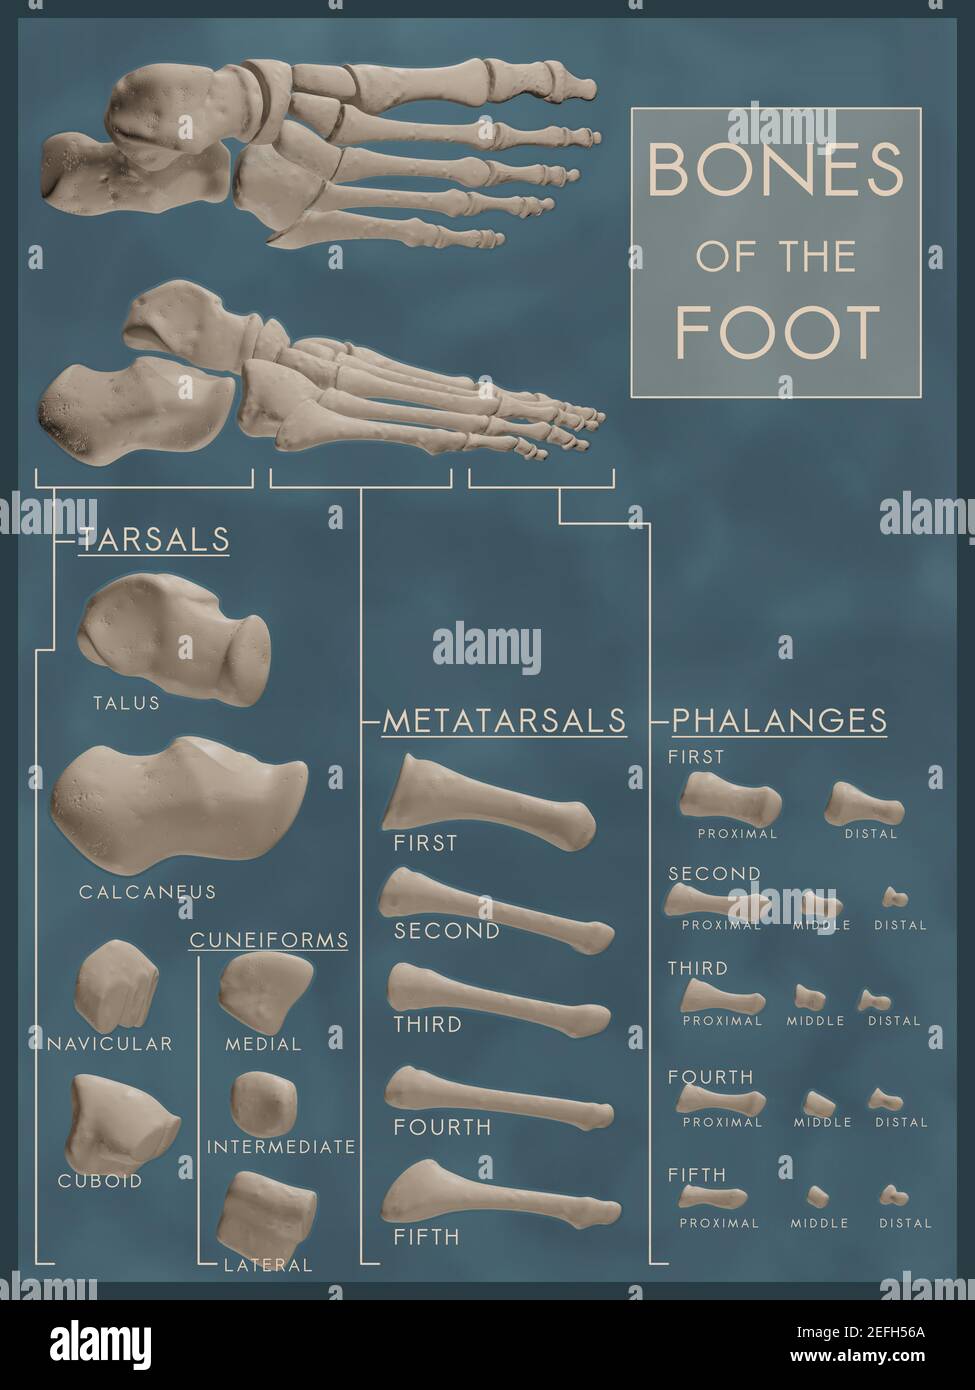 Classroom-ready poster showing bones of the foot in anatomical and exploded views. Each bone is labeled with scientific name and organised by category. Stock Photo